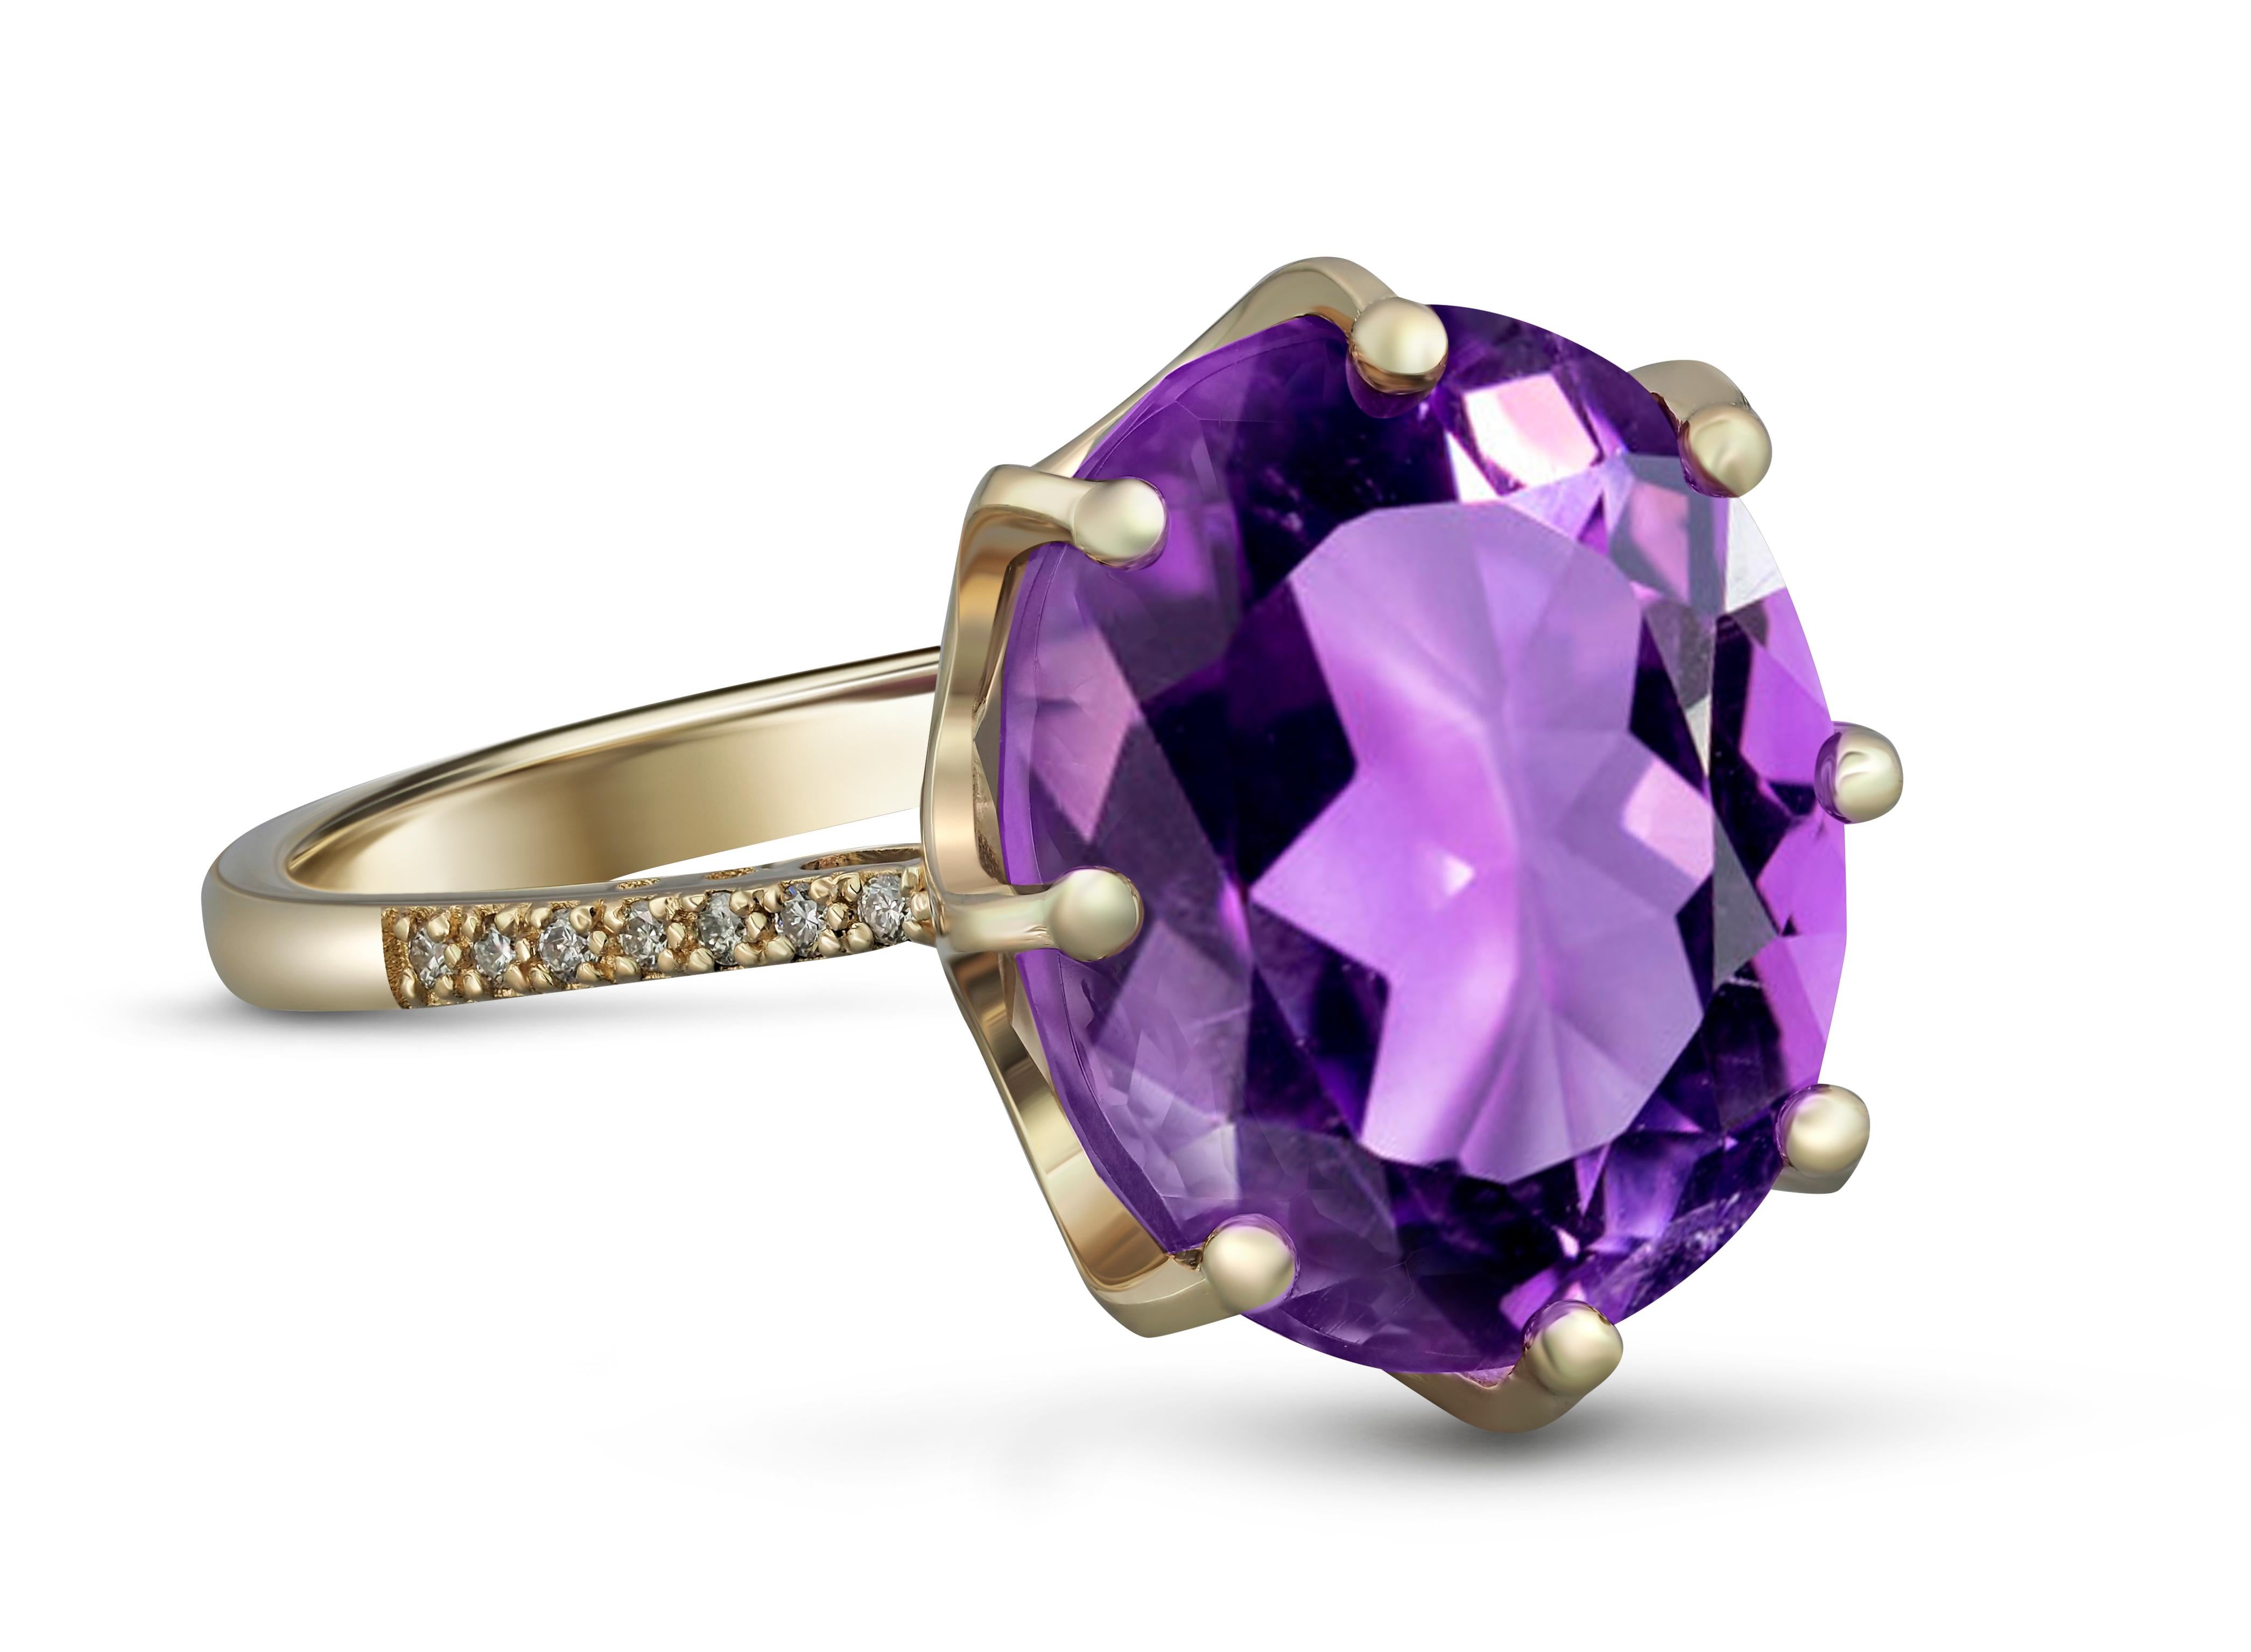 Amethyst cocktail 14k gold ring. 
Oval Amethyst Ring. 14k gold ring with Amethyst. Amethyst Engagement ring. February Birthstone Ring.

Metal: 14k gold
Weight: 3 gr depends from size

Gemstones:
Amethyst: oval cut, 10 ct, purple color,